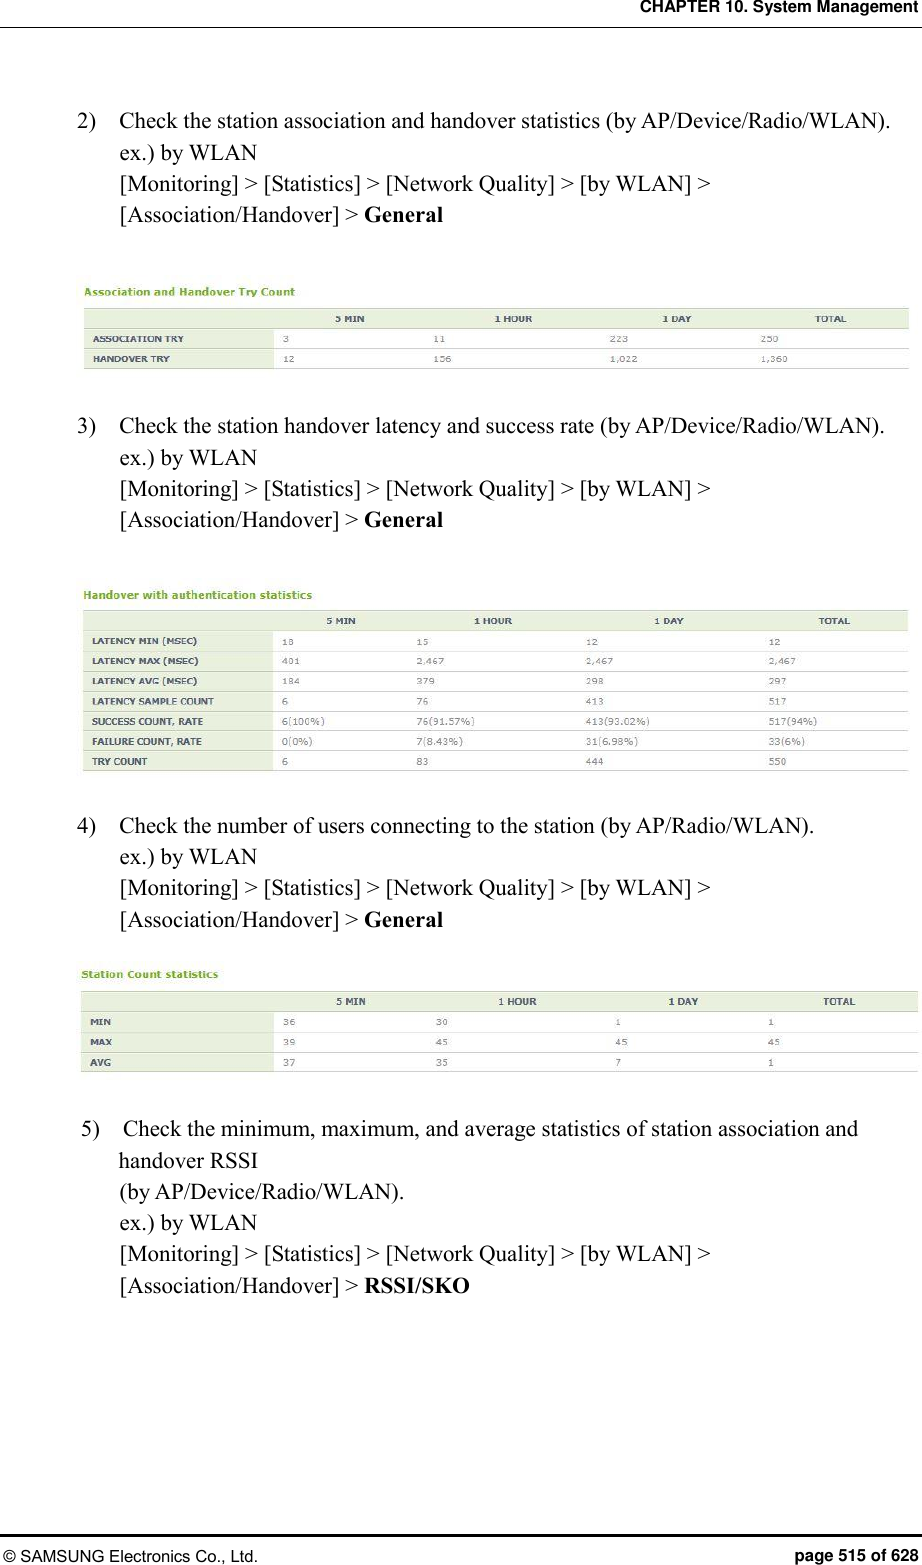 CHAPTER 10. System Management © SAMSUNG Electronics Co., Ltd.  page 515 of 628 2)    Check the station association and handover statistics (by AP/Device/Radio/WLAN). ex.) by WLAN [Monitoring] &gt; [Statistics] &gt; [Network Quality] &gt; [by WLAN] &gt; [Association/Handover] &gt; General   3)    Check the station handover latency and success rate (by AP/Device/Radio/WLAN). ex.) by WLAN [Monitoring] &gt; [Statistics] &gt; [Network Quality] &gt; [by WLAN] &gt; [Association/Handover] &gt; General   4)    Check the number of users connecting to the station (by AP/Radio/WLAN). ex.) by WLAN [Monitoring] &gt; [Statistics] &gt; [Network Quality] &gt; [by WLAN] &gt; [Association/Handover] &gt; General  5)    Check the minimum, maximum, and average statistics of station association and handover RSSI (by AP/Device/Radio/WLAN). ex.) by WLAN [Monitoring] &gt; [Statistics] &gt; [Network Quality] &gt; [by WLAN] &gt; [Association/Handover] &gt; RSSI/SKO 